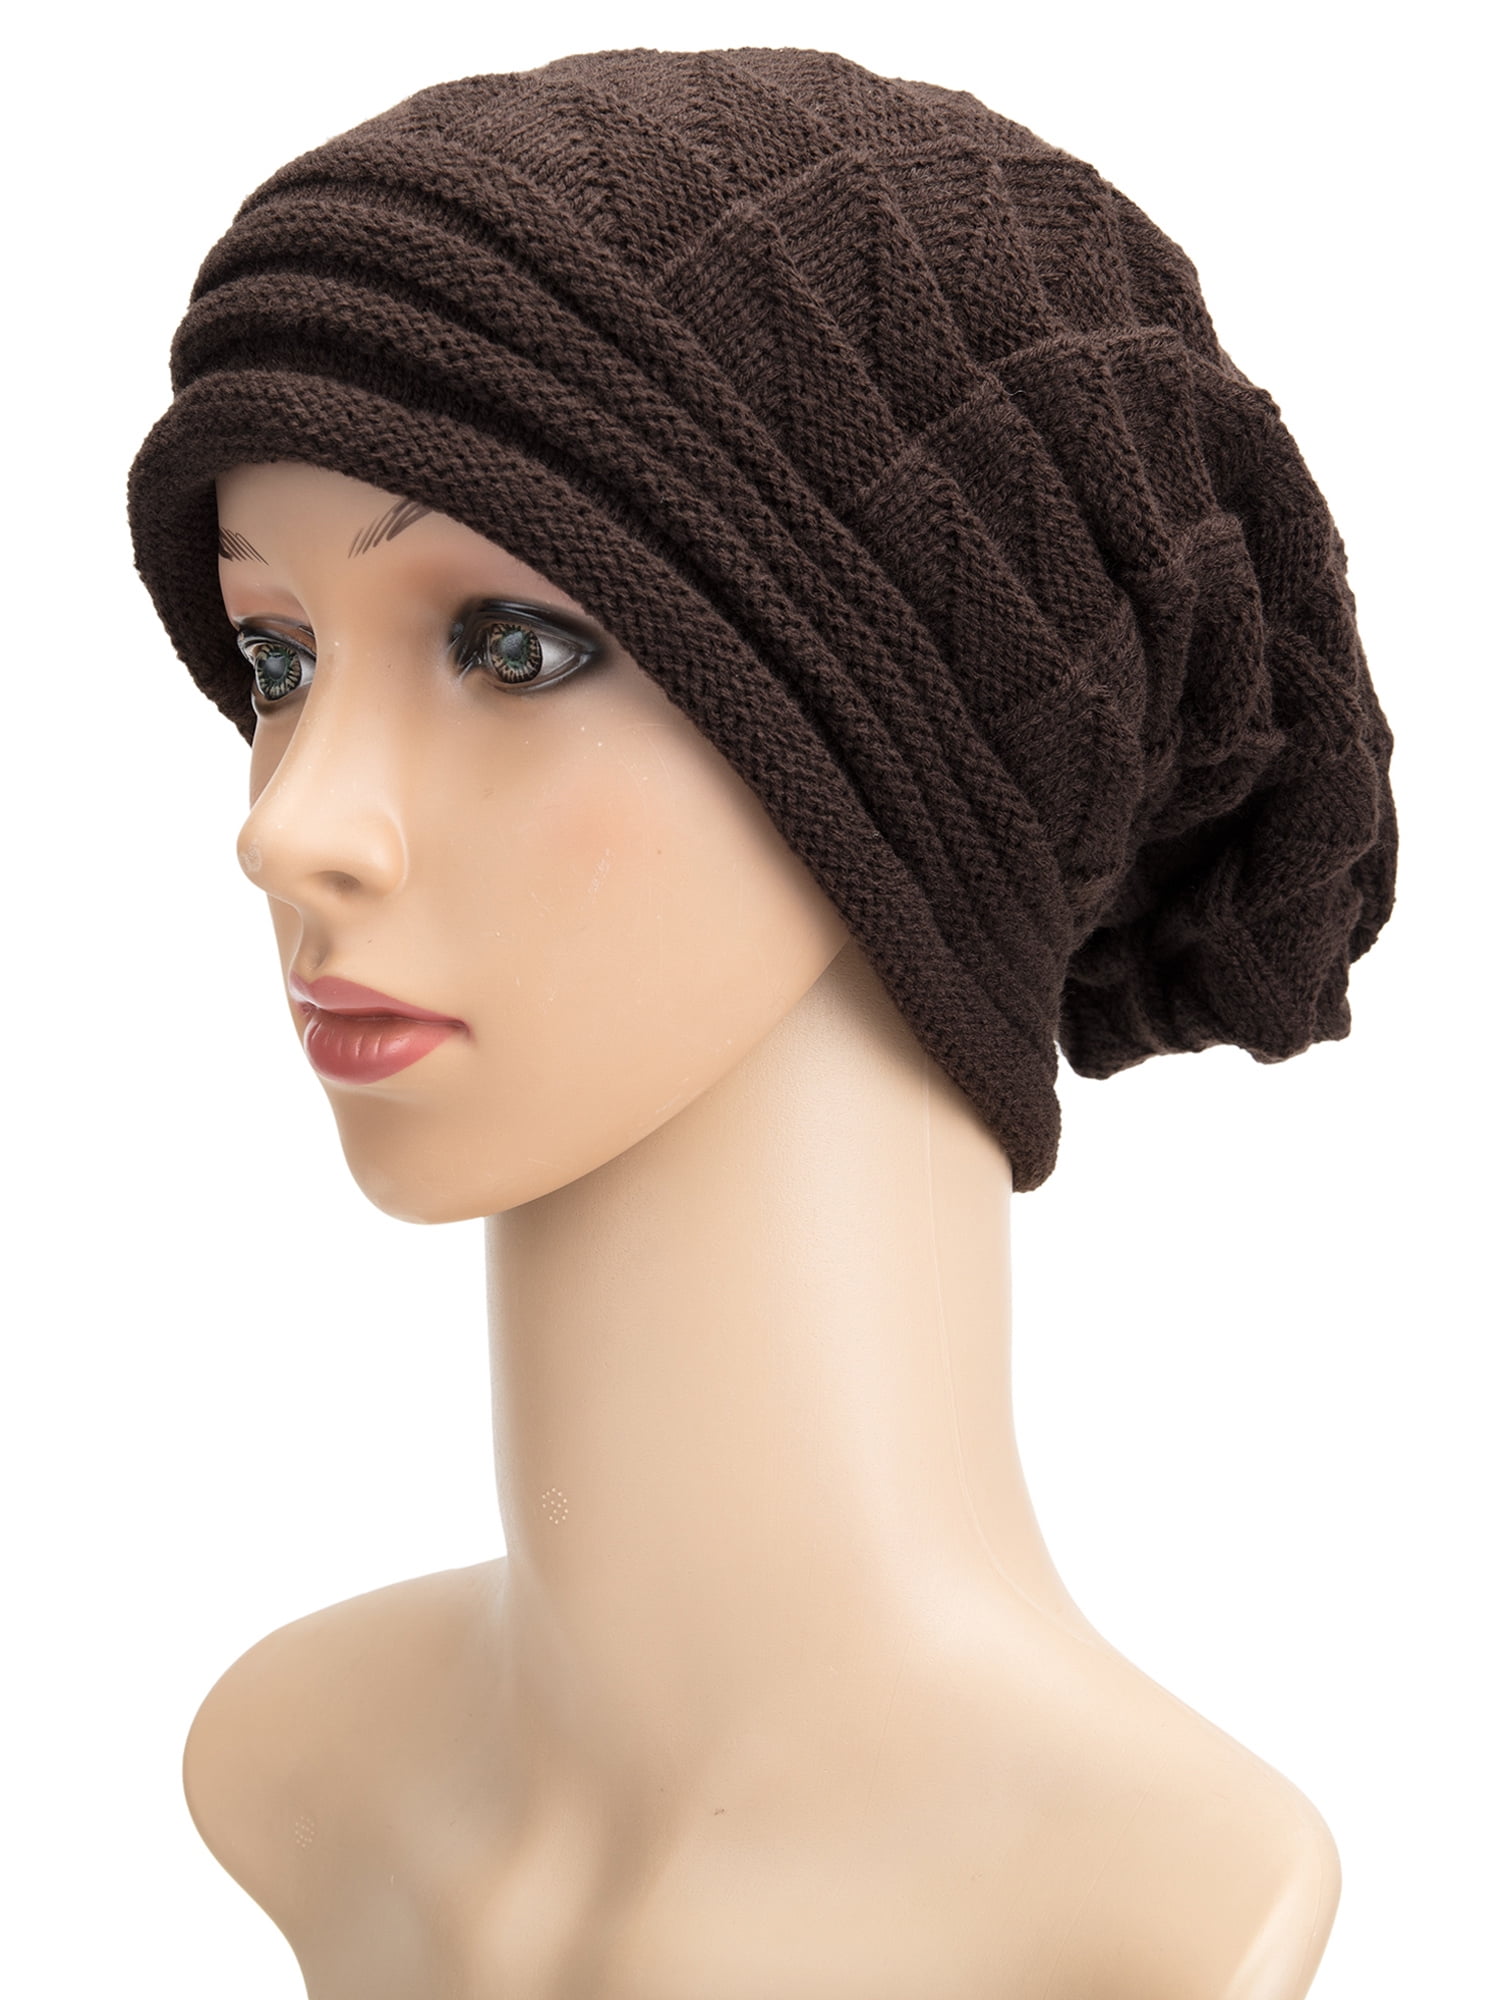 Unisex Knitted Knit Line Stitched Woolly Winter Oversized Slouch Beanie Hat Cap 